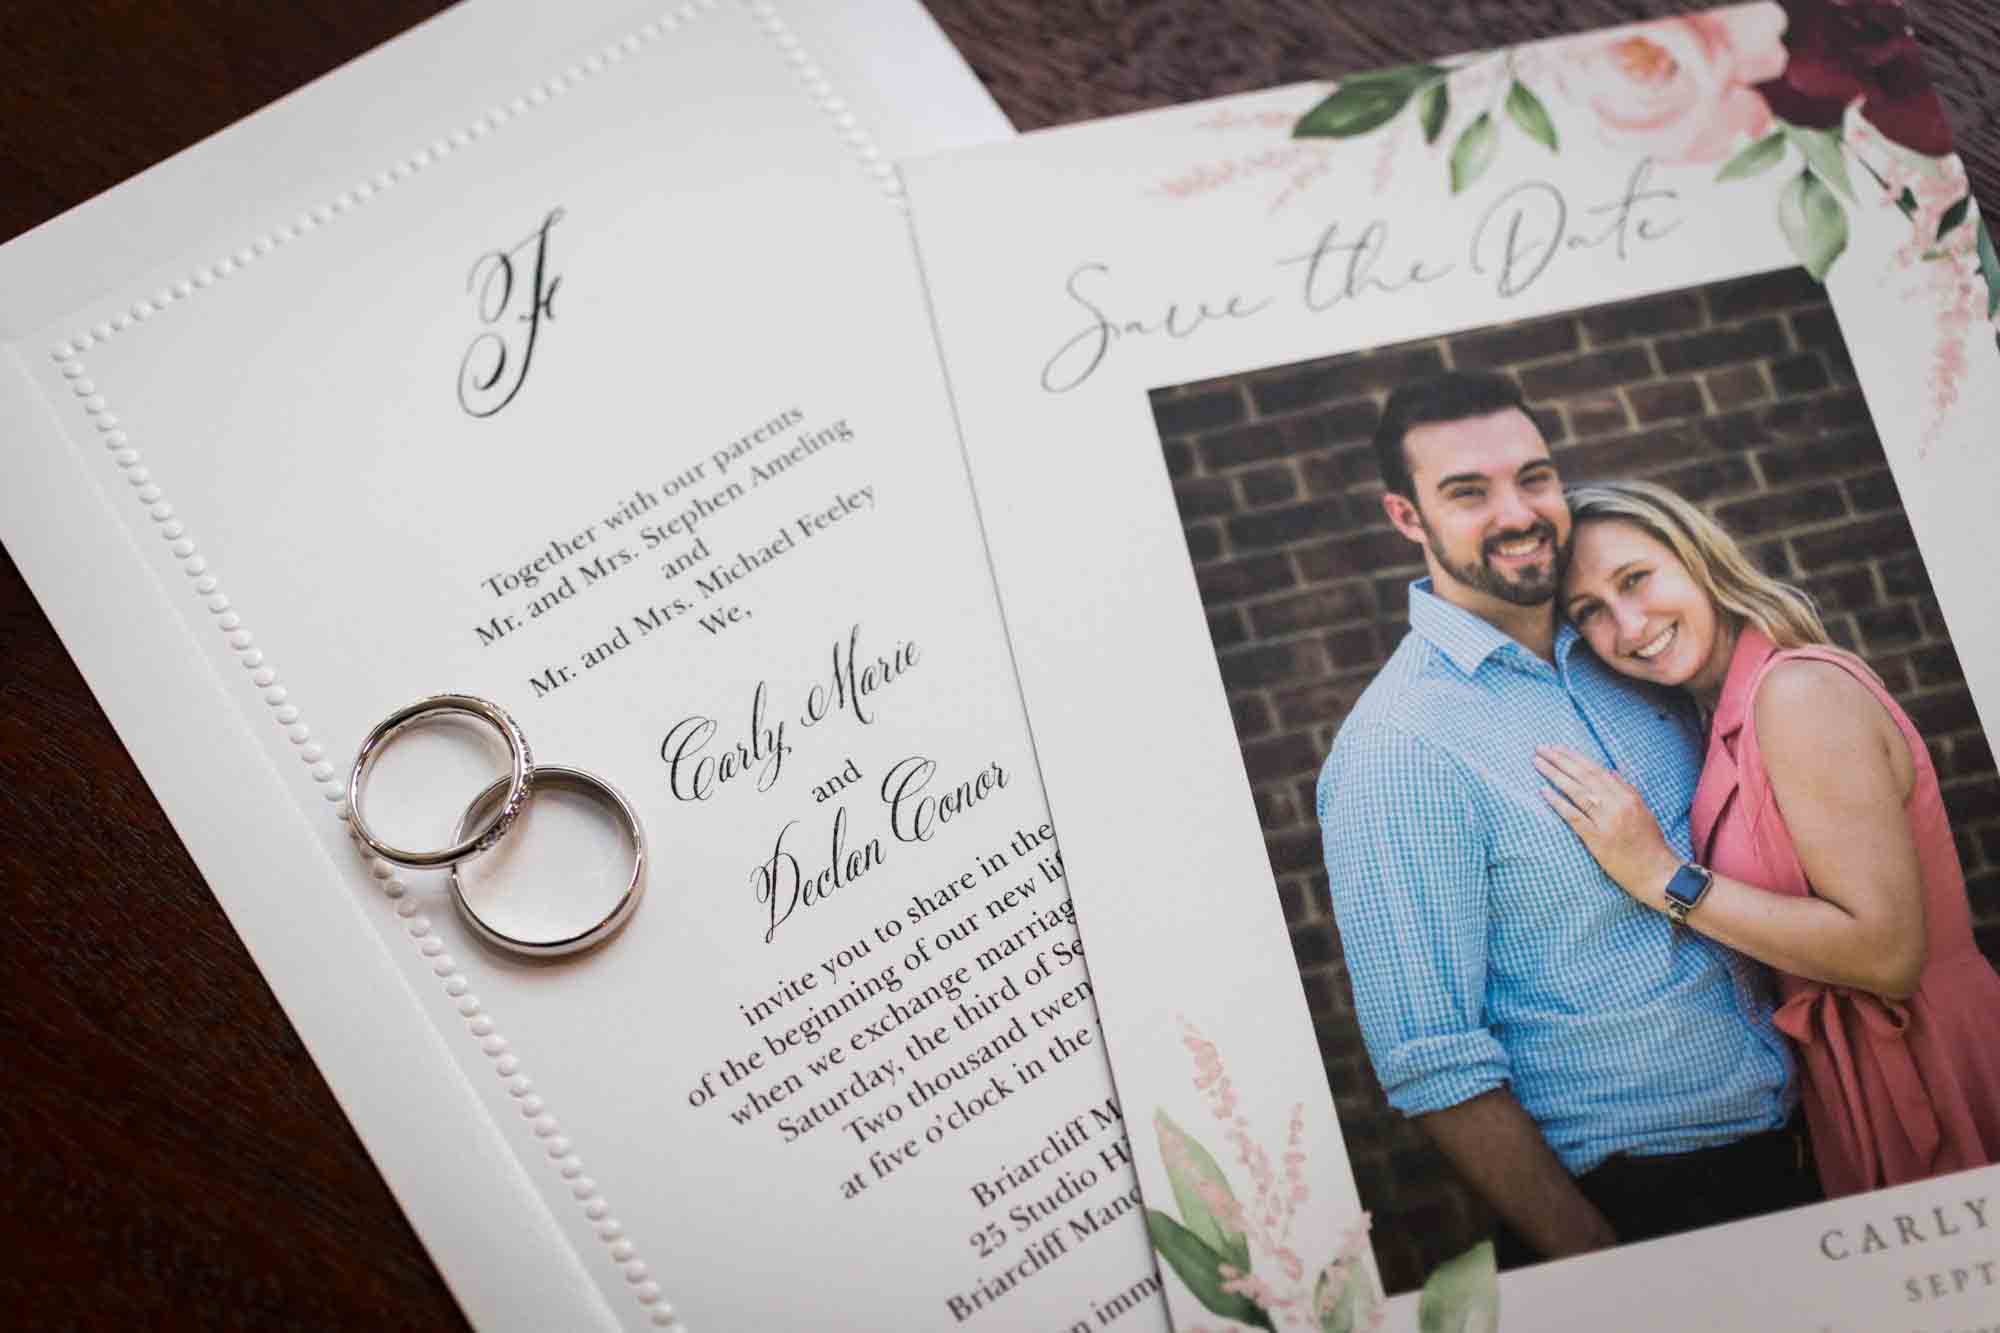 Close up of invitation with photo of bride and groom and two wedding rings